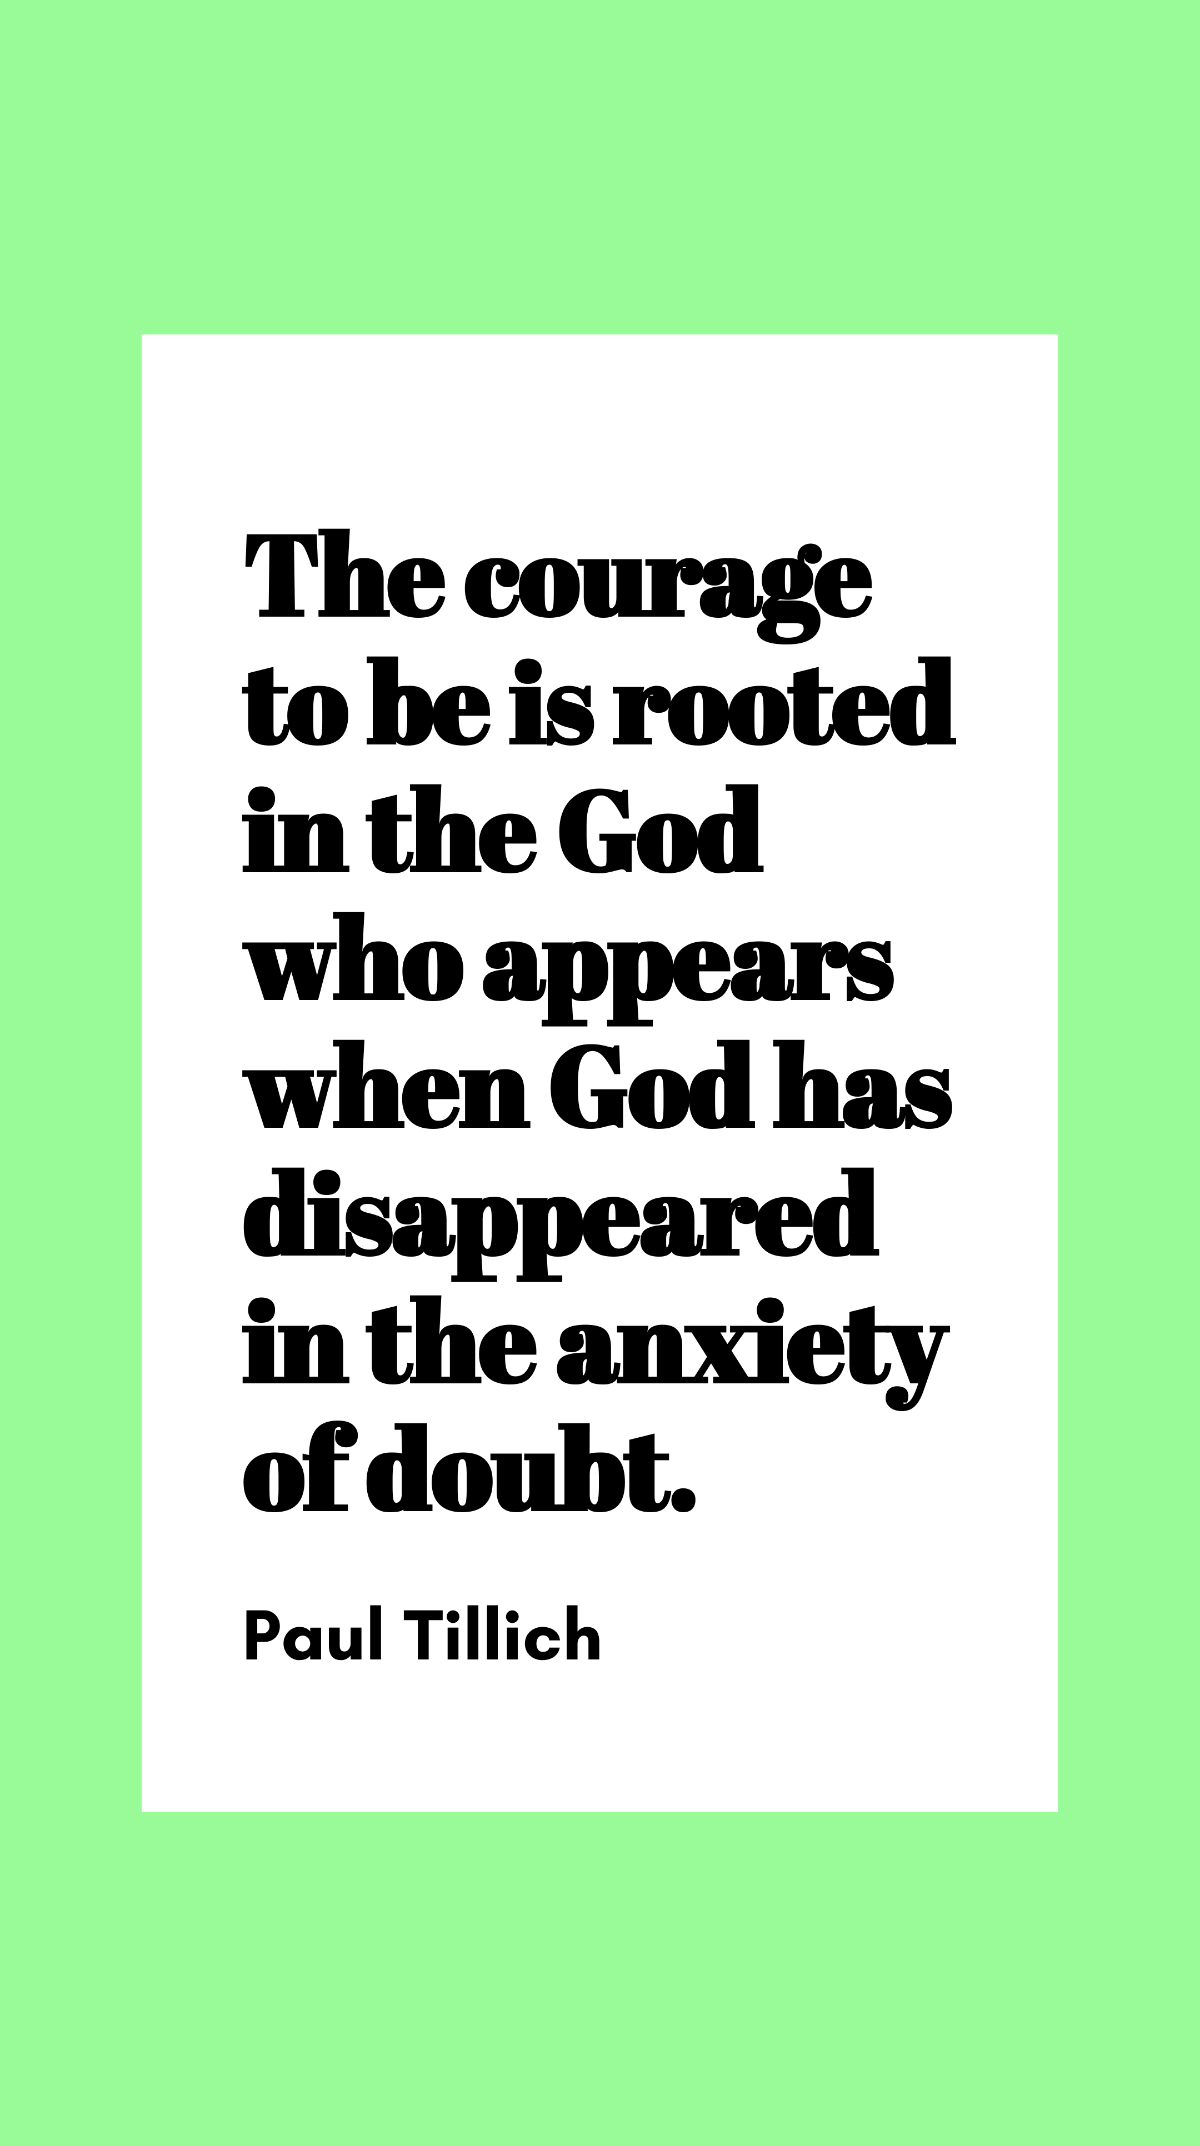 Paul Tillich - The courage to be is rooted in the God who appears when God has disappeared in the anxiety of doubt. Template